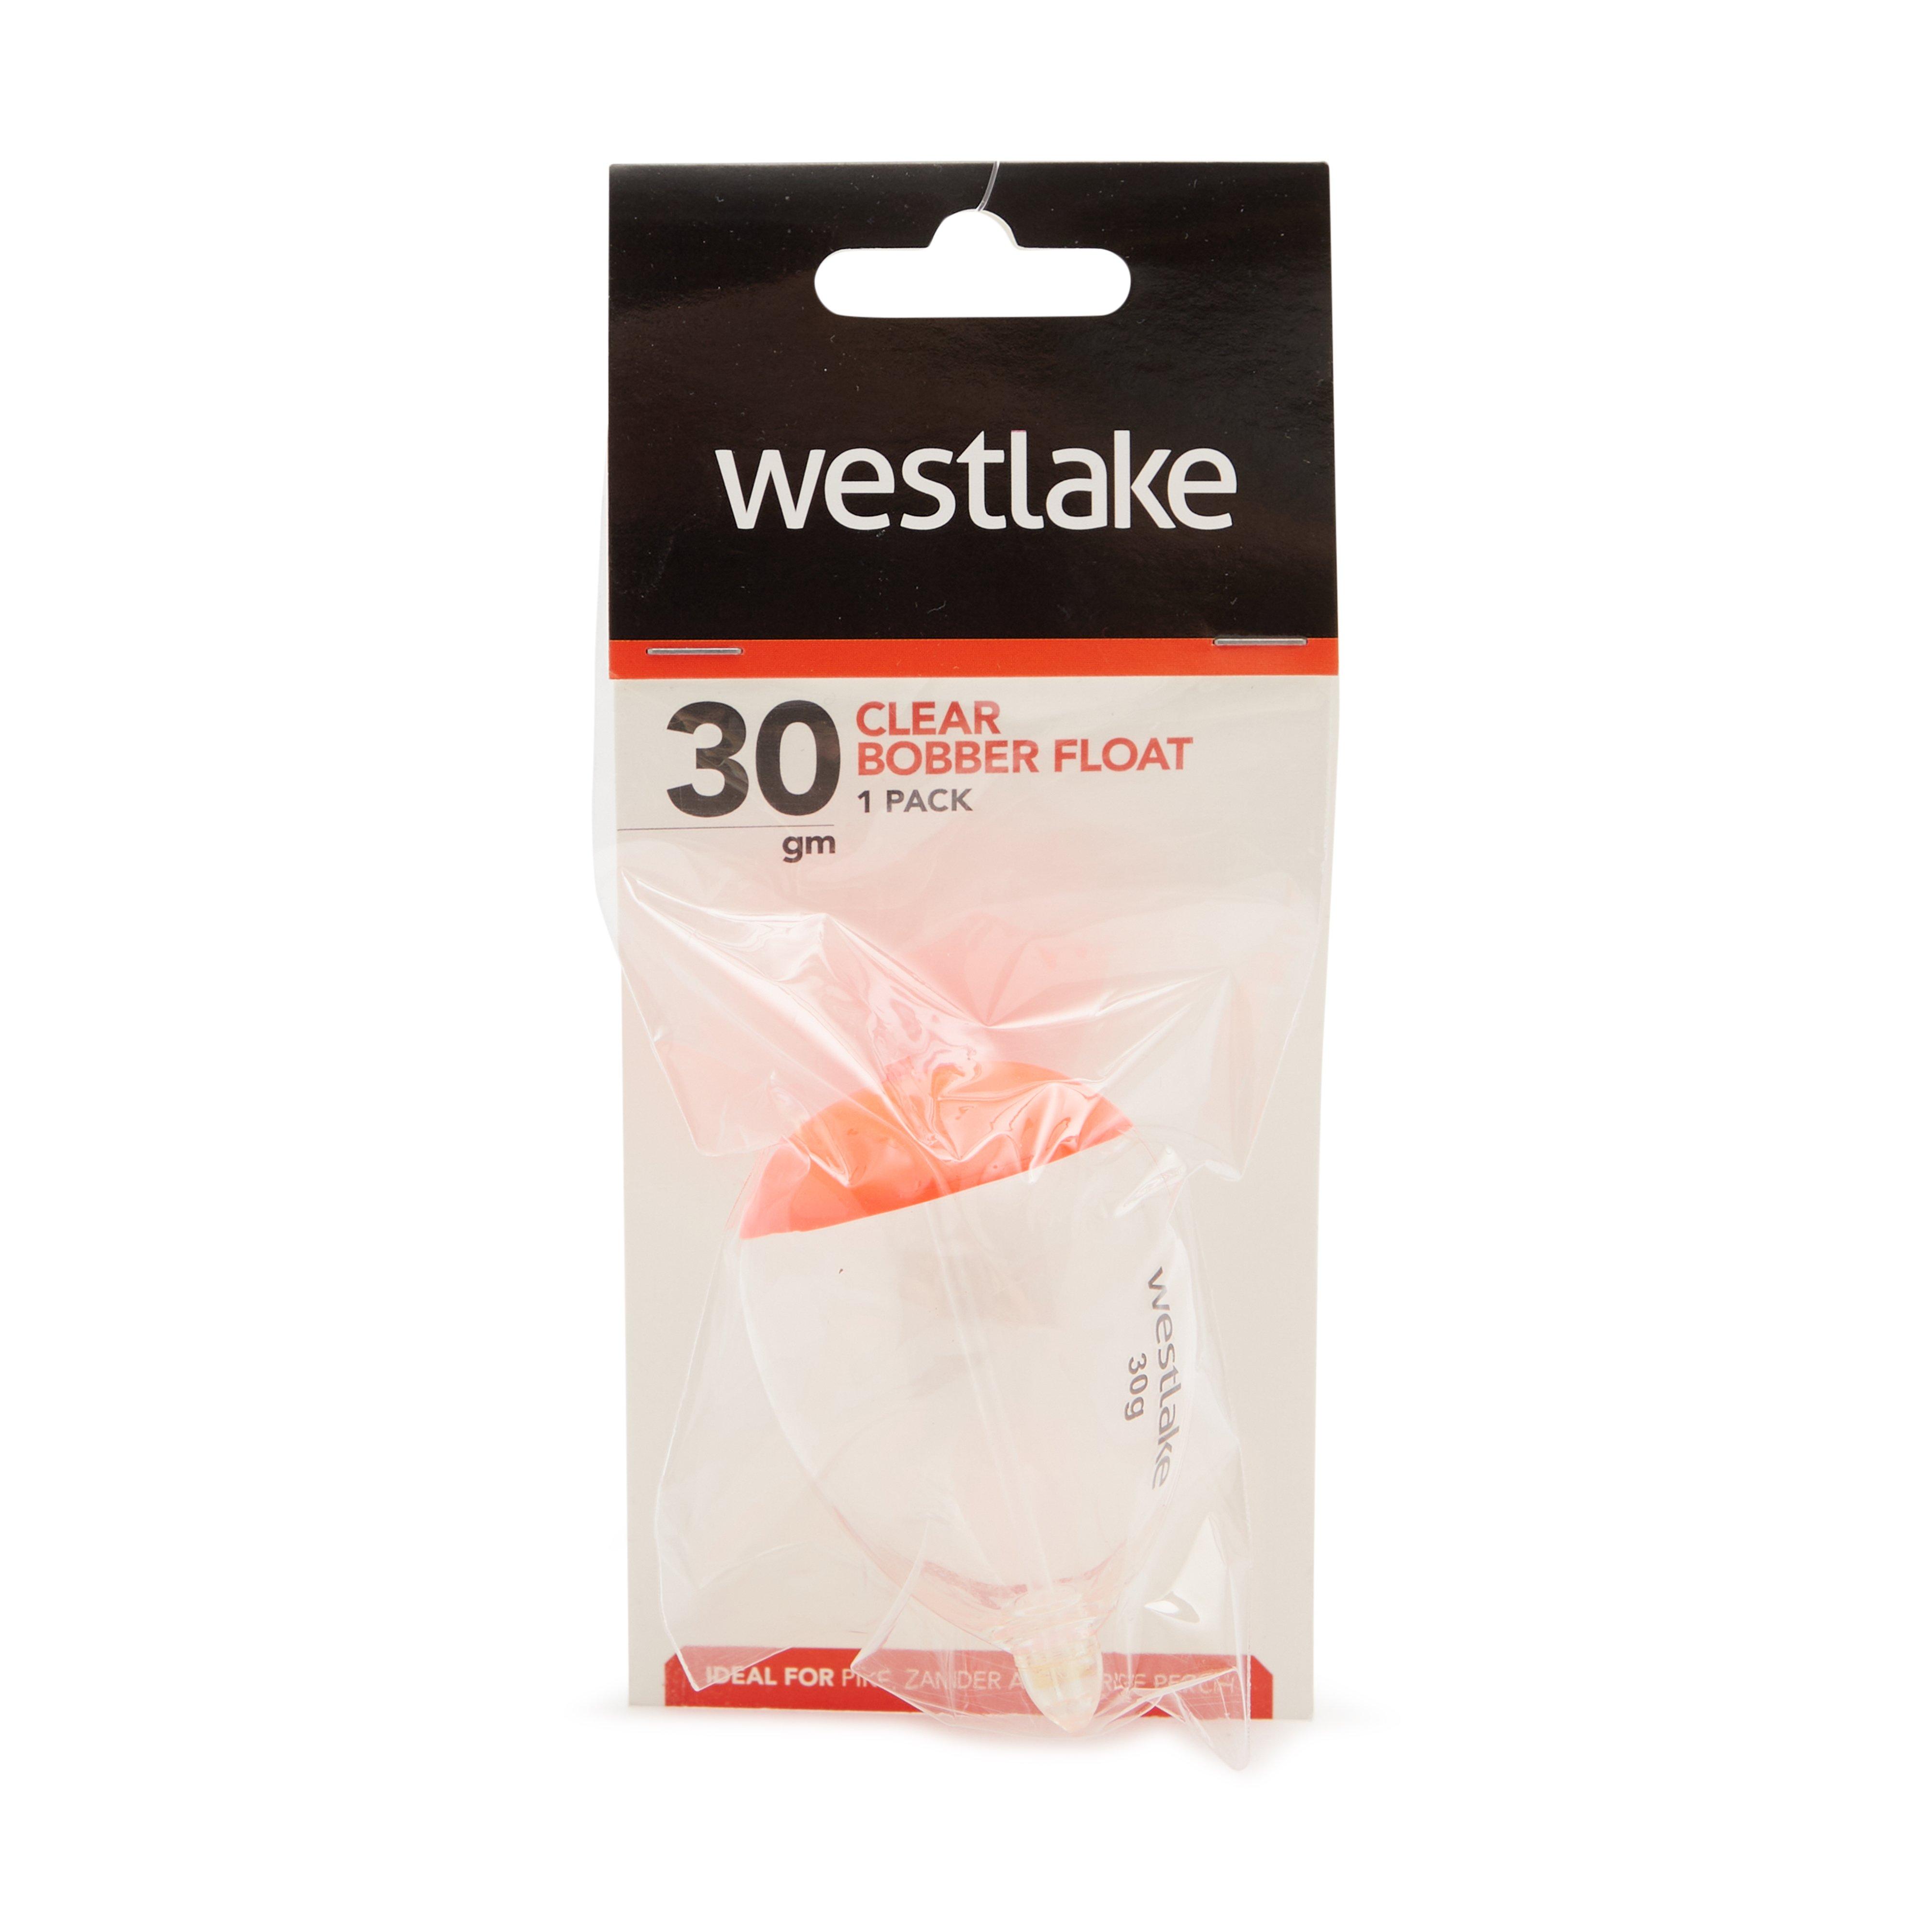 Westlake Clear Pike Bob Float 30G Review